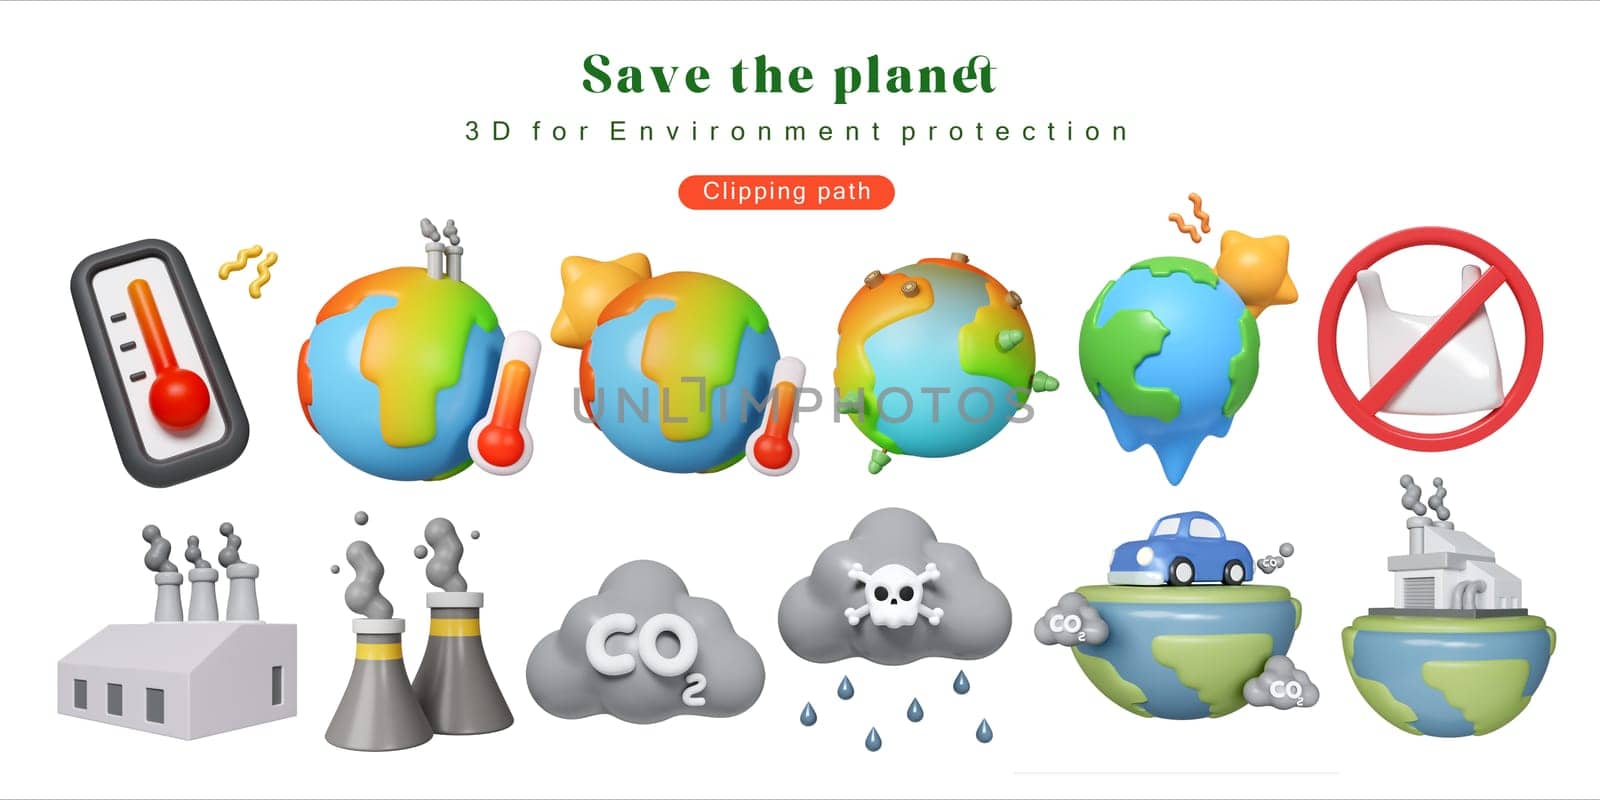 Eco Global Warming icon set Illustration Eco global warming icons for Environment protection, save the planet, for poster, web, social media post. 3D Illustration by meepiangraphic